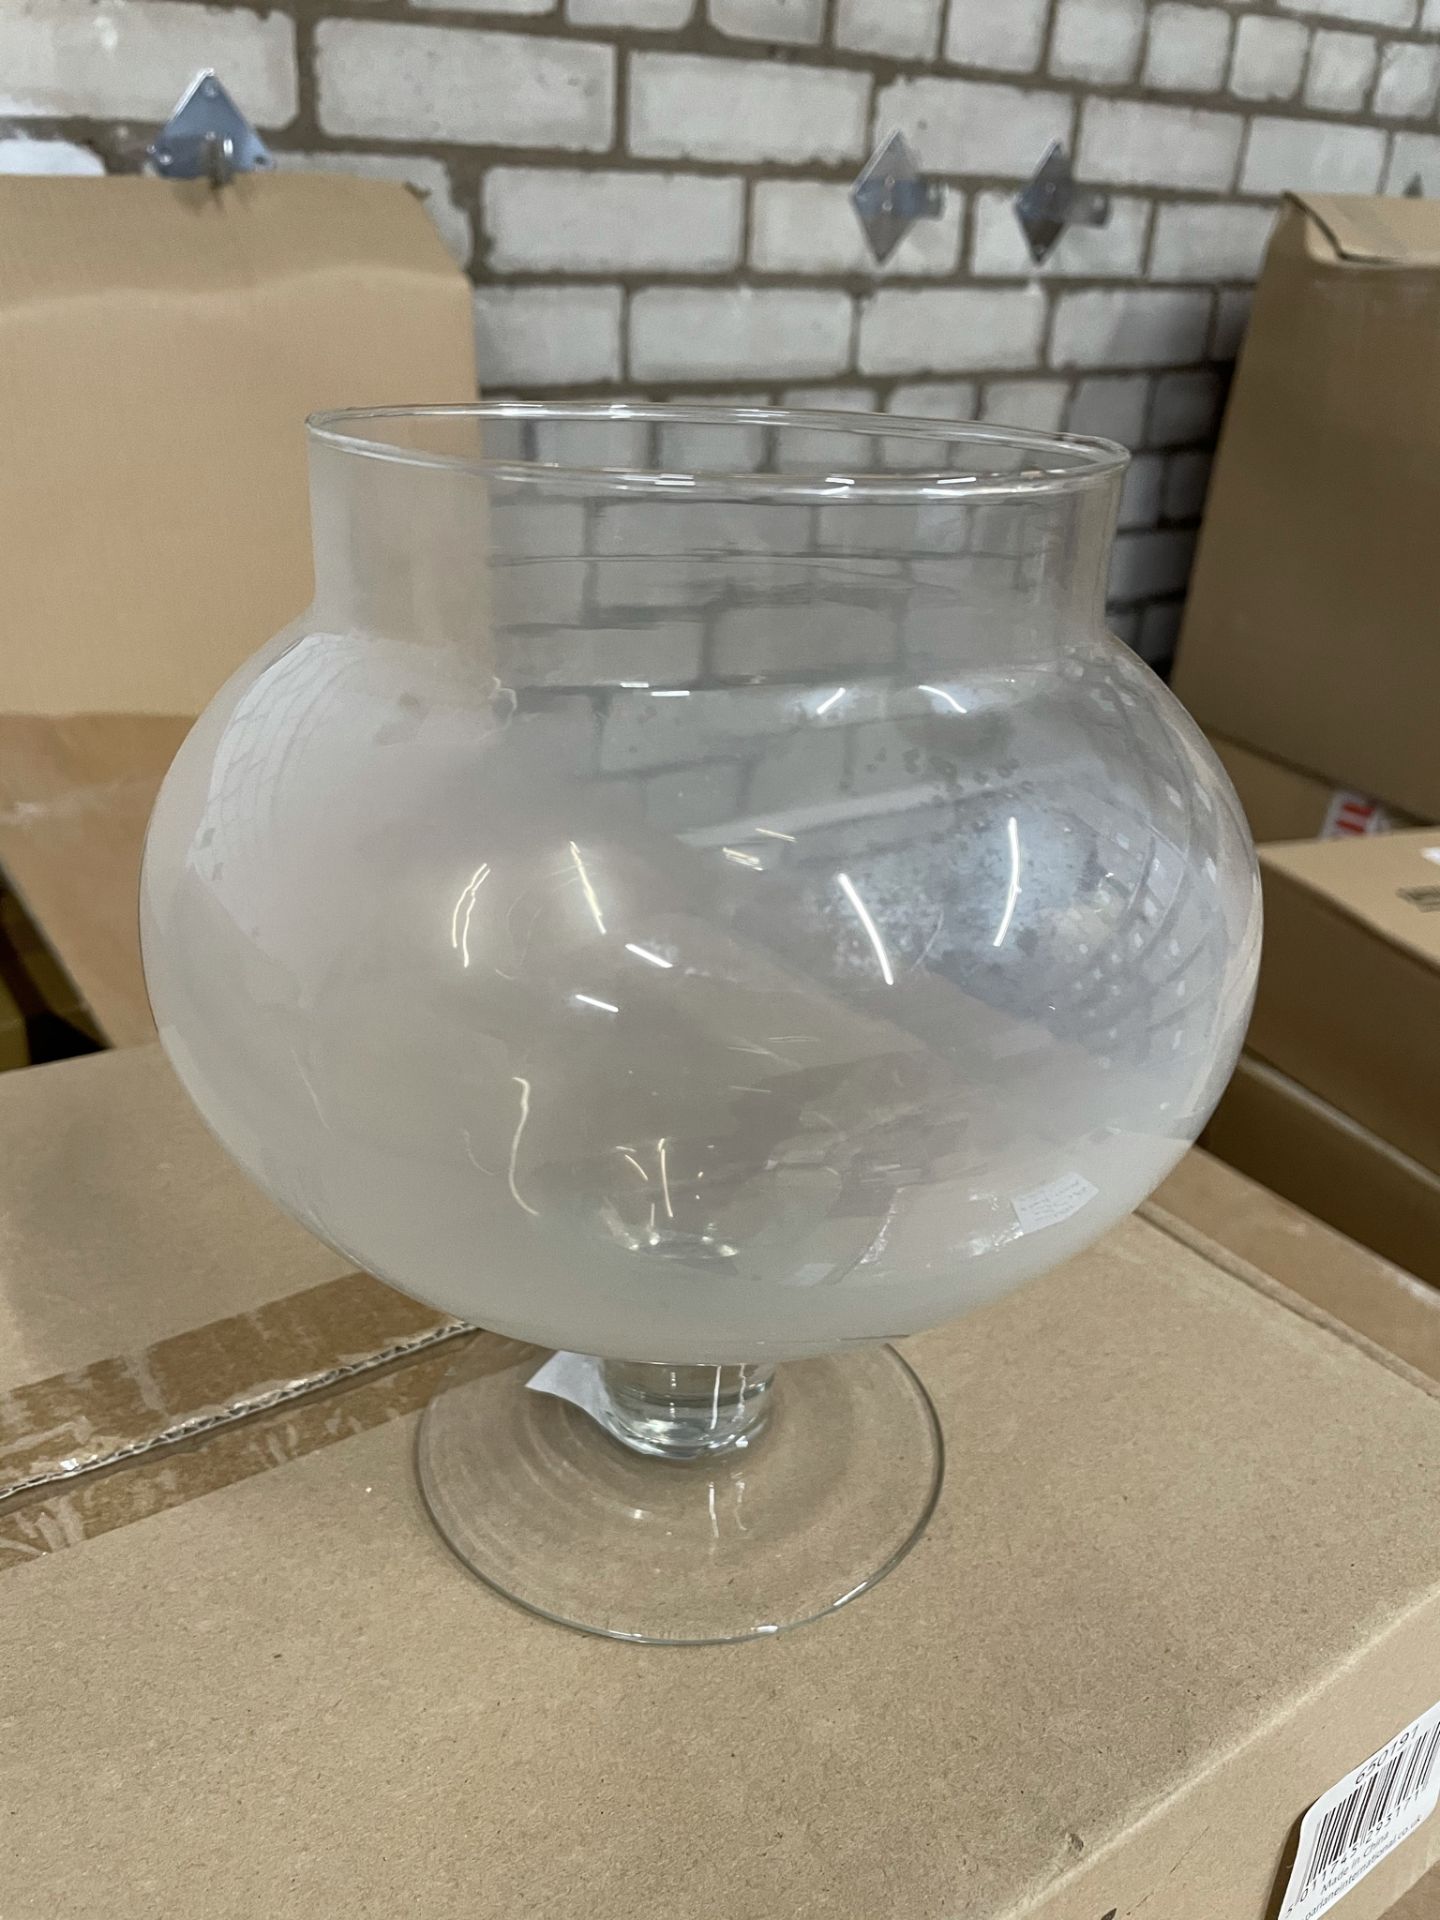 Large Quantity of Various Spare/Loose Glassware Items - Examples can be seen in pictures - Image 5 of 18